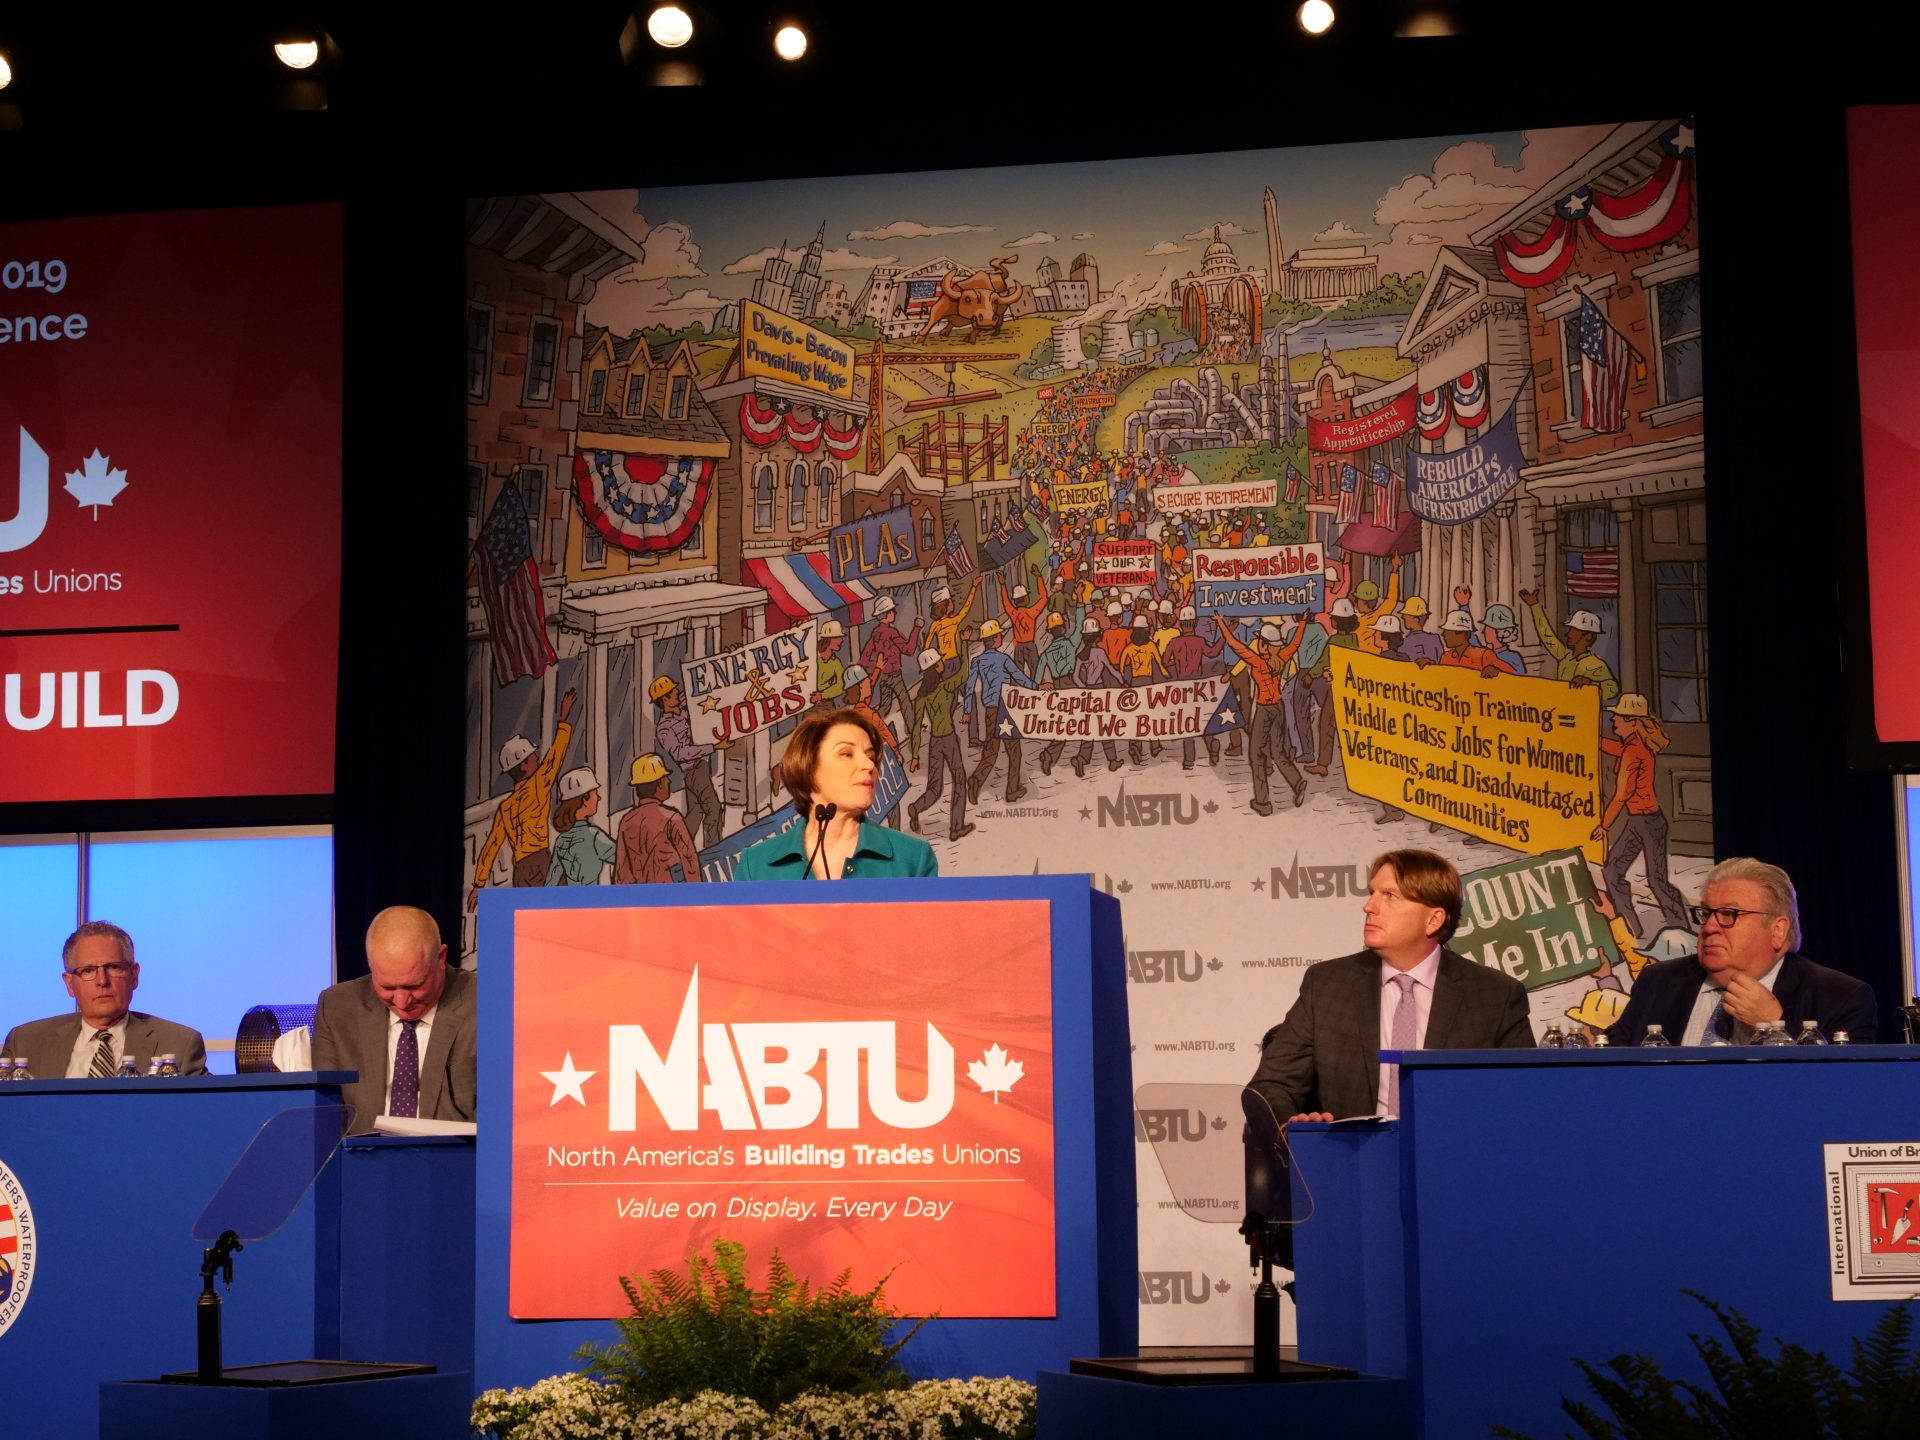 Image from the Gallery: North America’s Building Trades Unions – Washington, D.C.